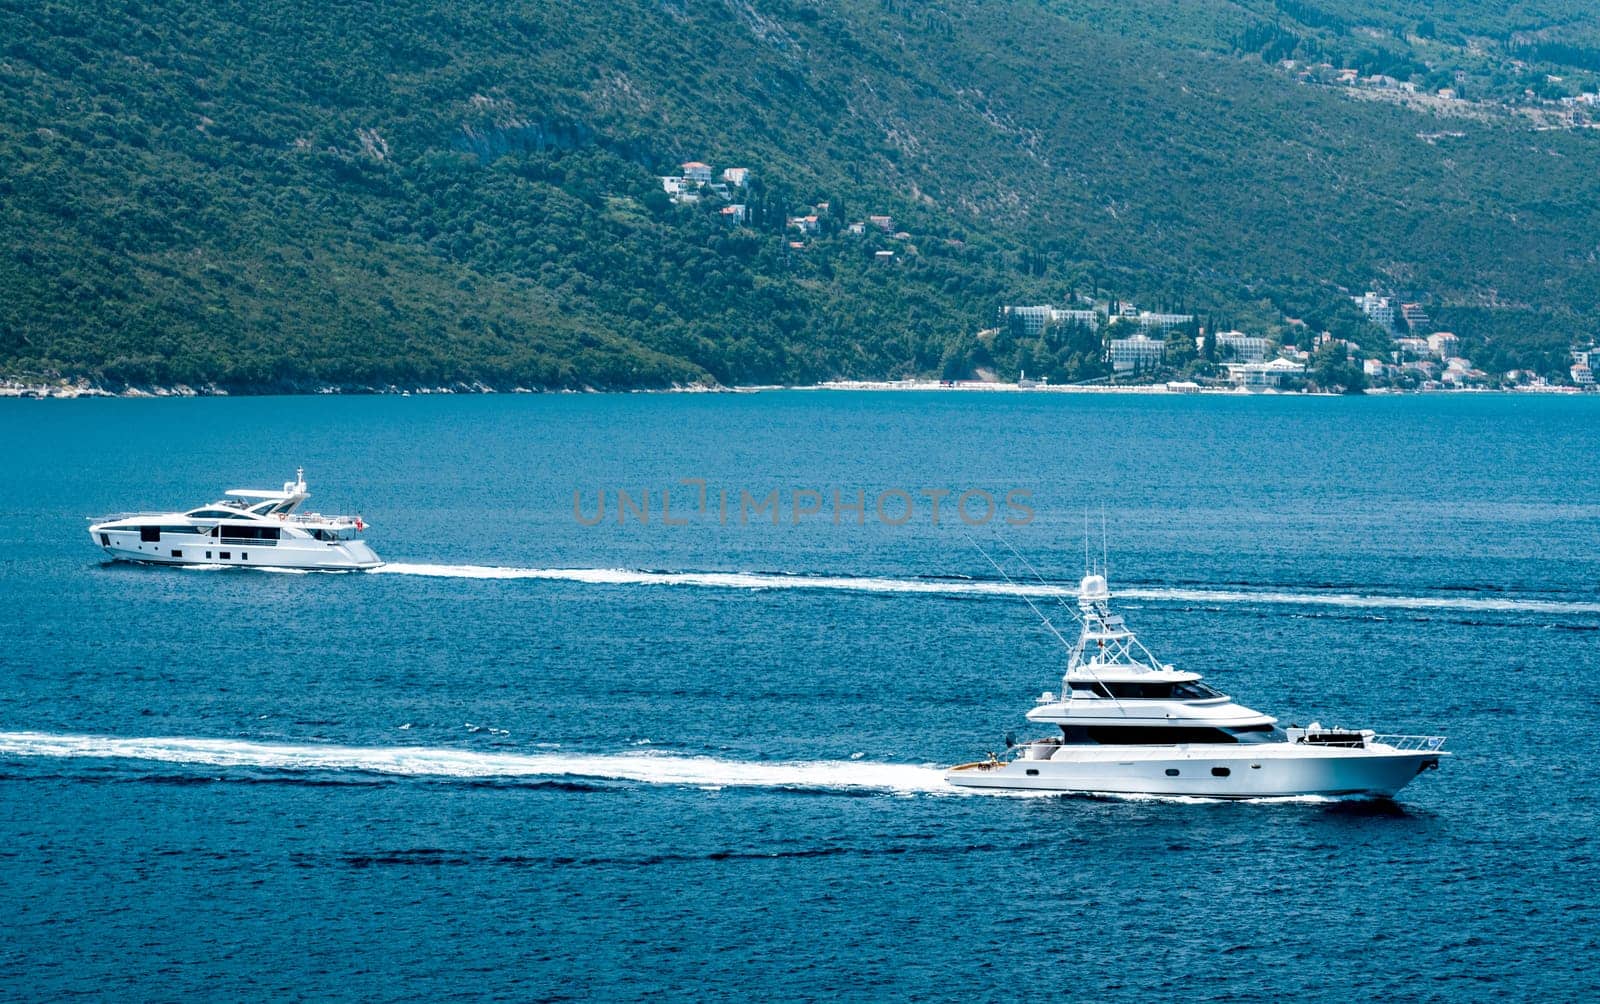 Yachts in Adriatic sea, Montenegro. Scenic view on mountains, luxury boats and Mediterranean landscapes